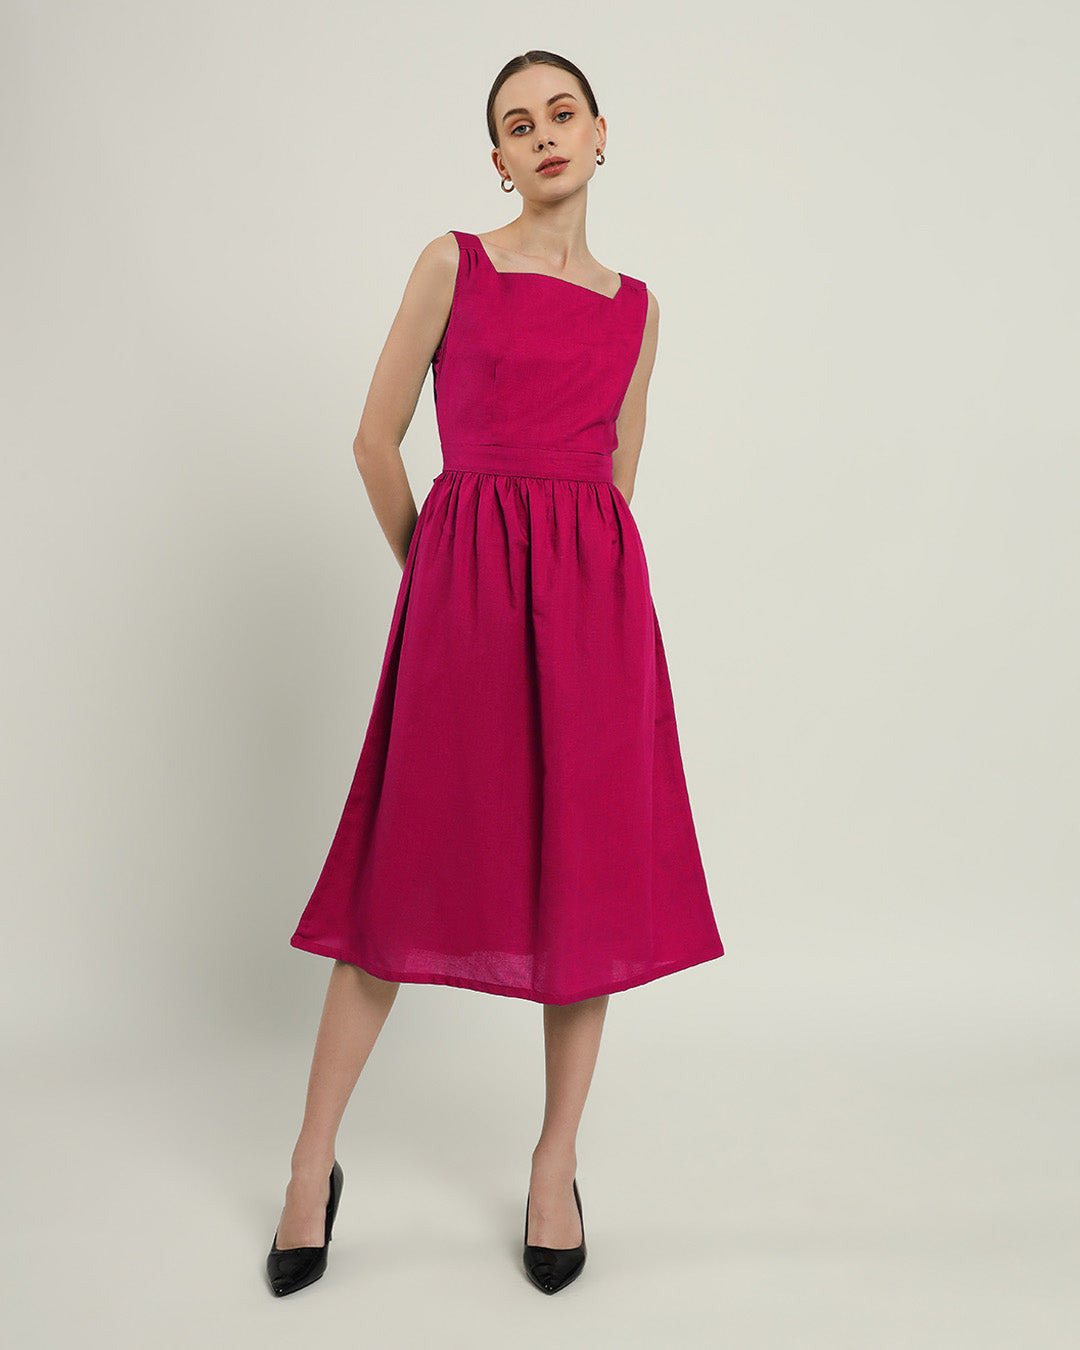 The Mihara Berry Cotton Dress